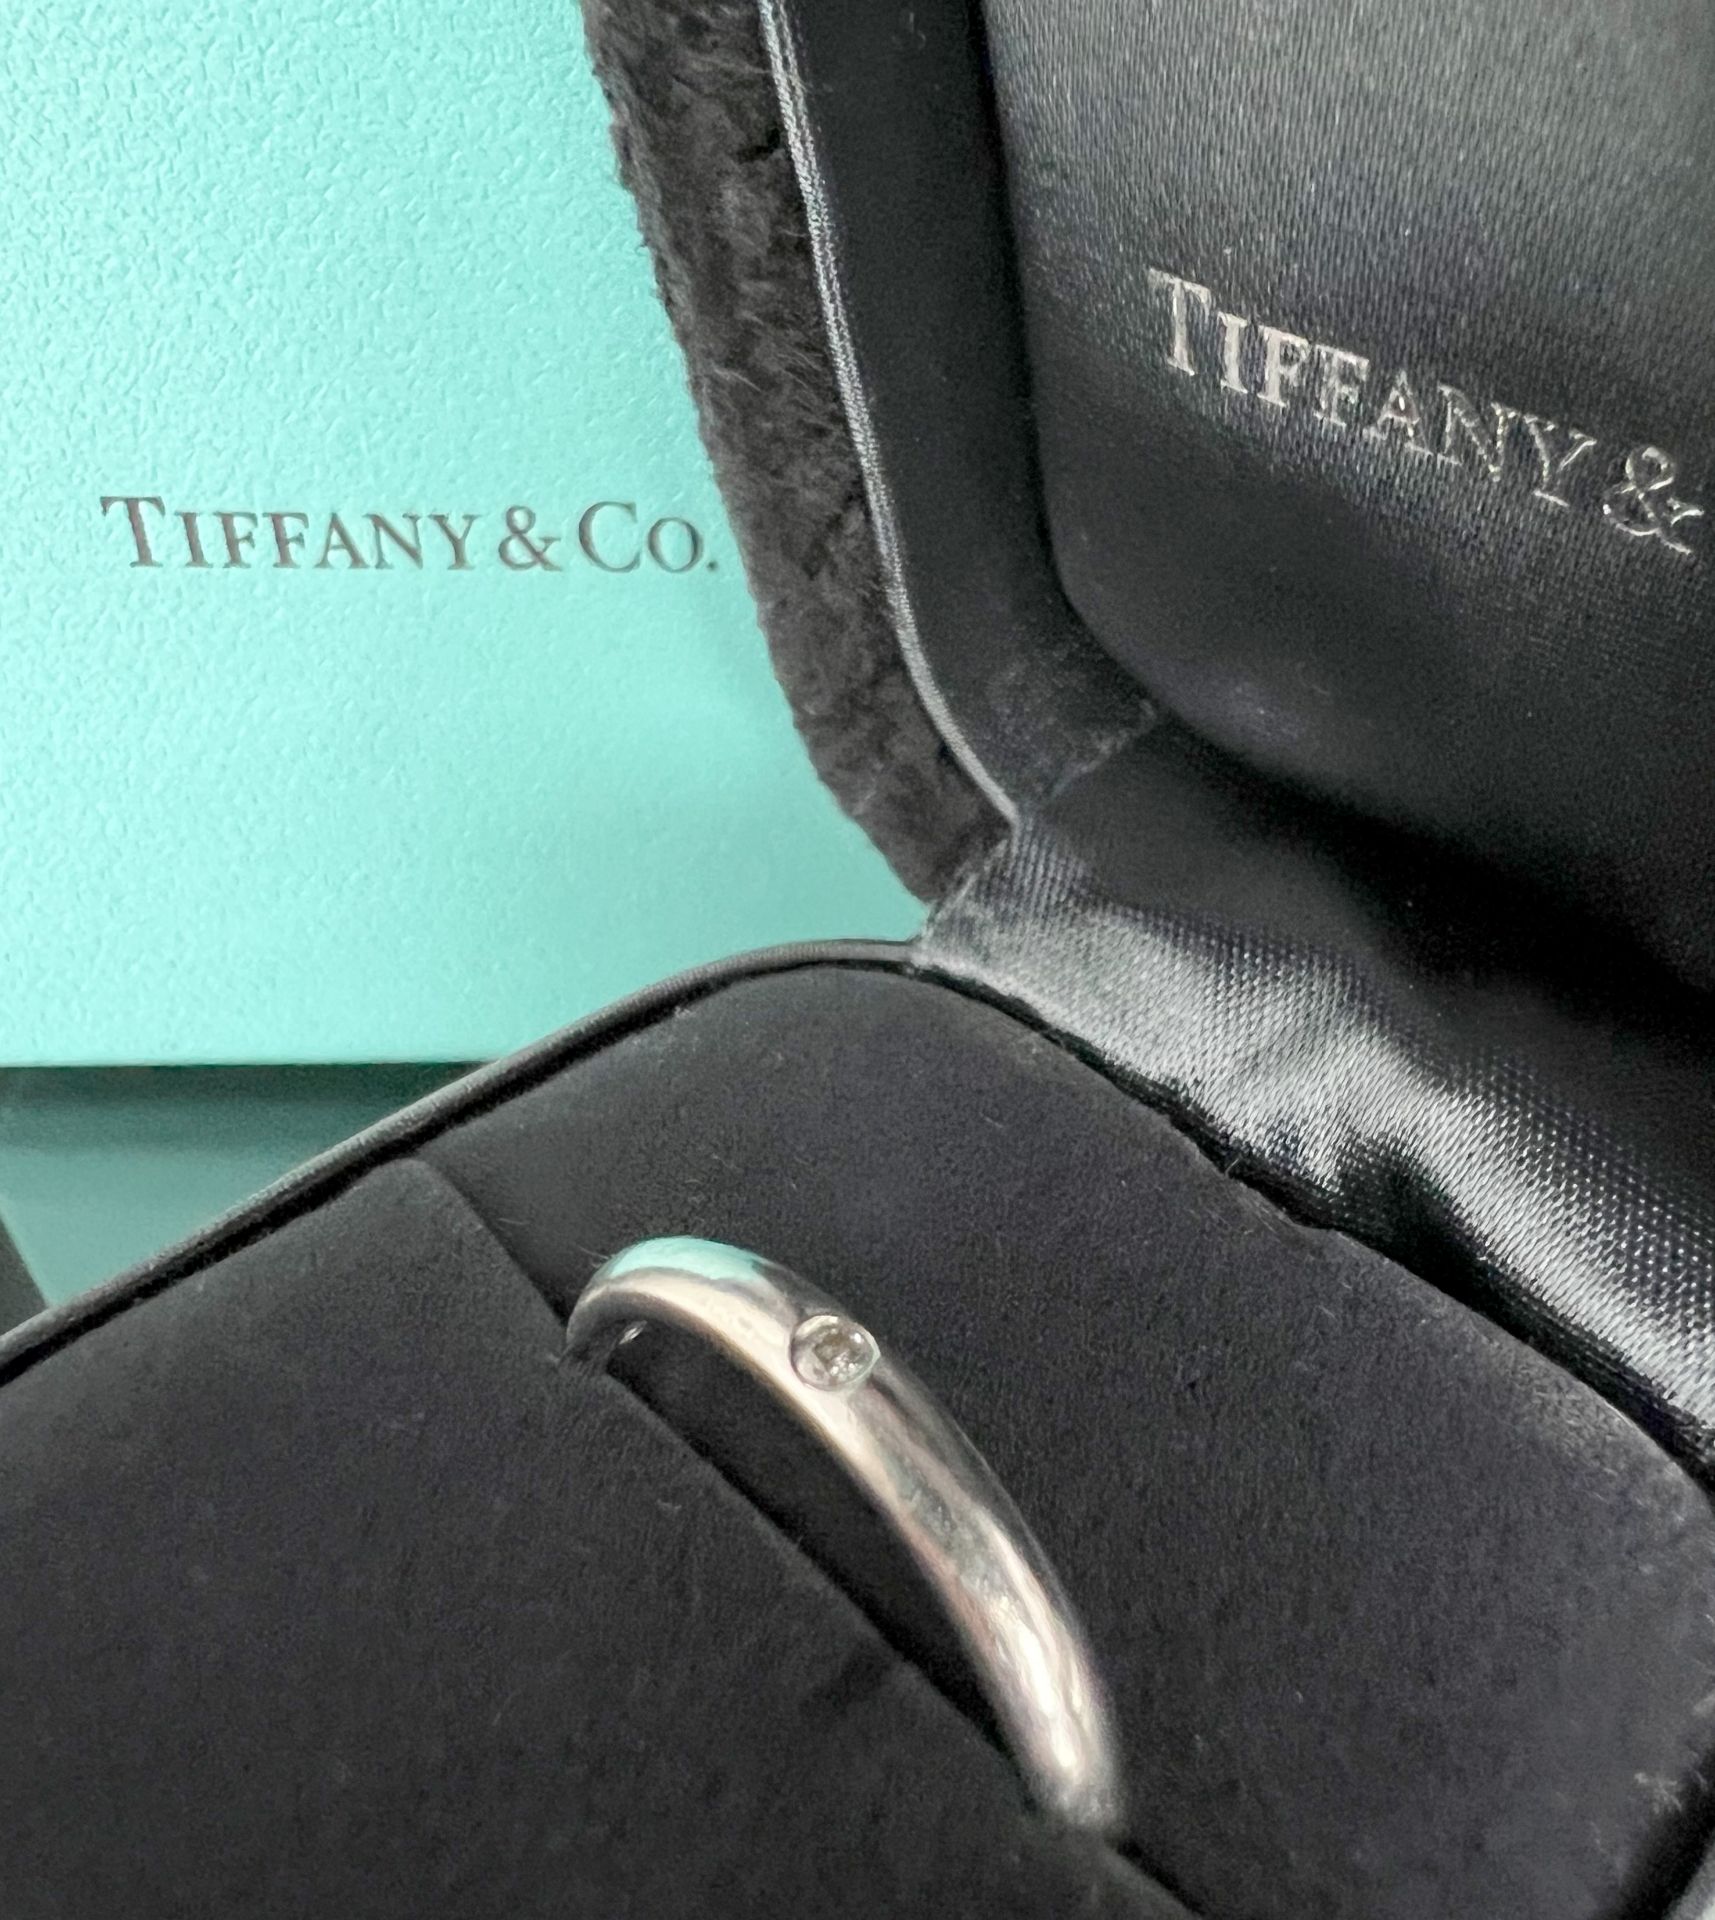 Solitaire ring 950 platinum by TIFFANY / PERETTI with a diamond of approx. 0.02 ct. - Image 2 of 5